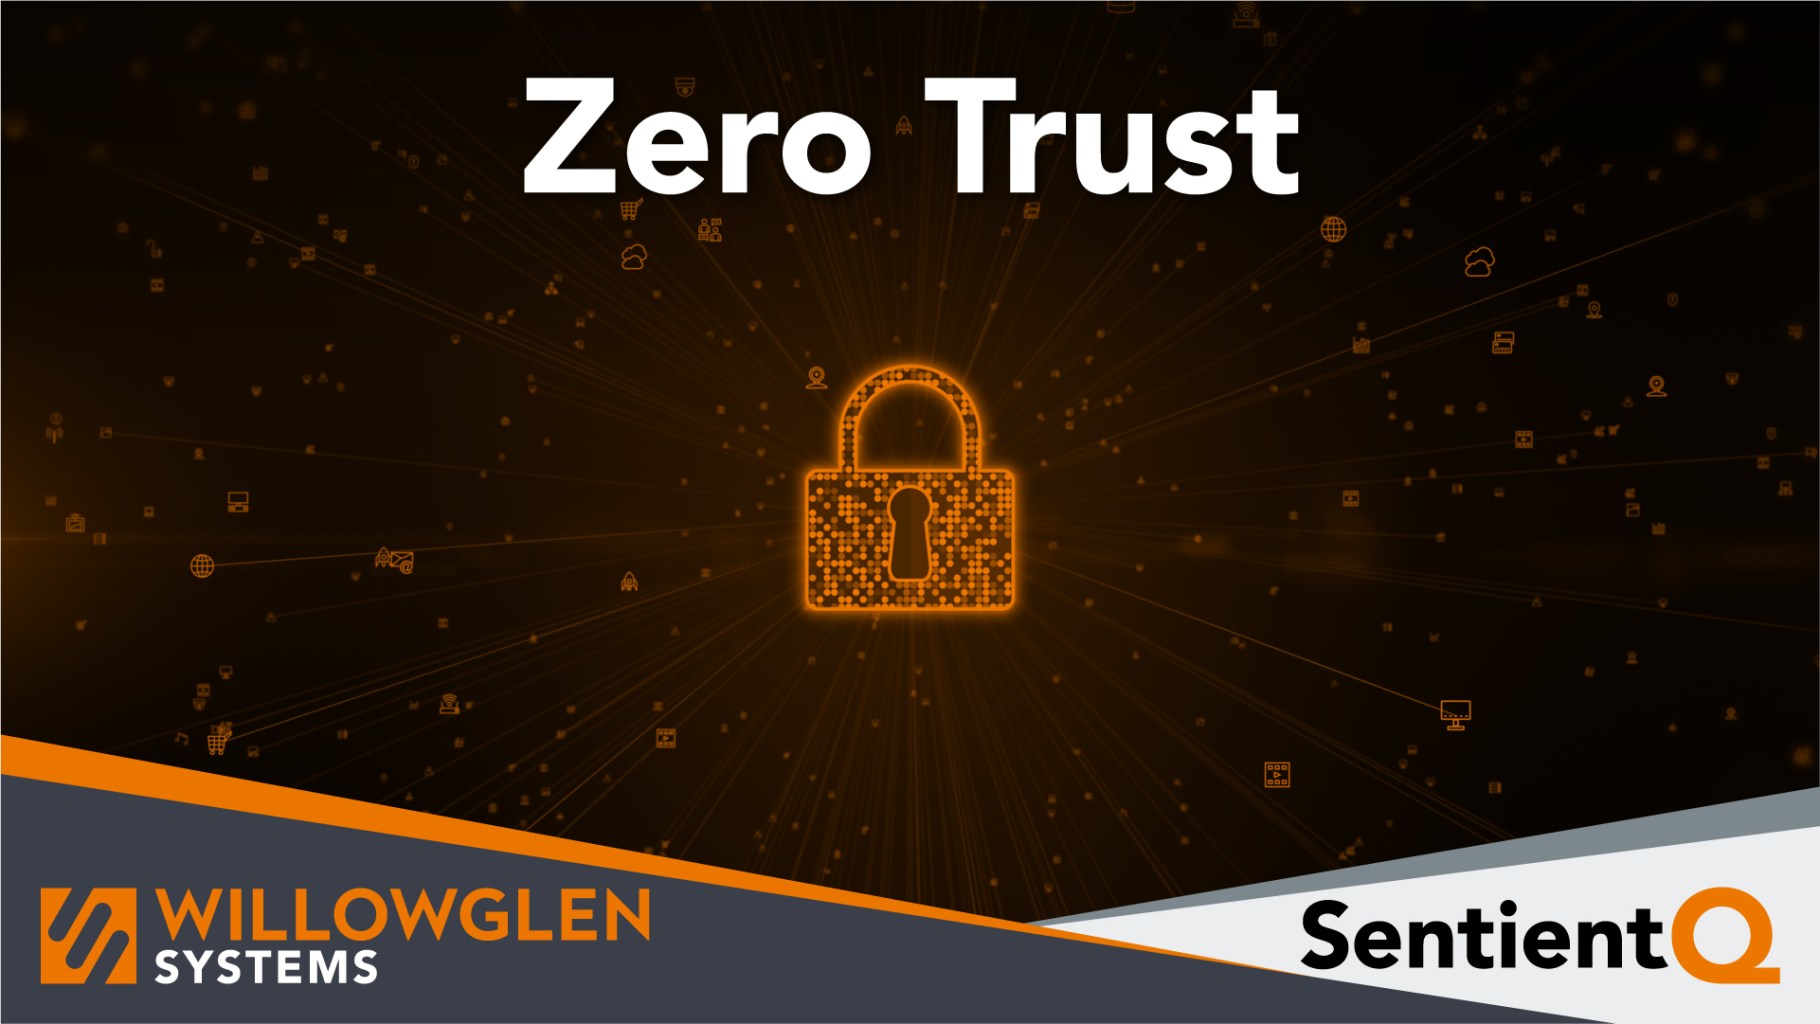 Zero Trust with a lock and the Willowglen and SentientQ logos